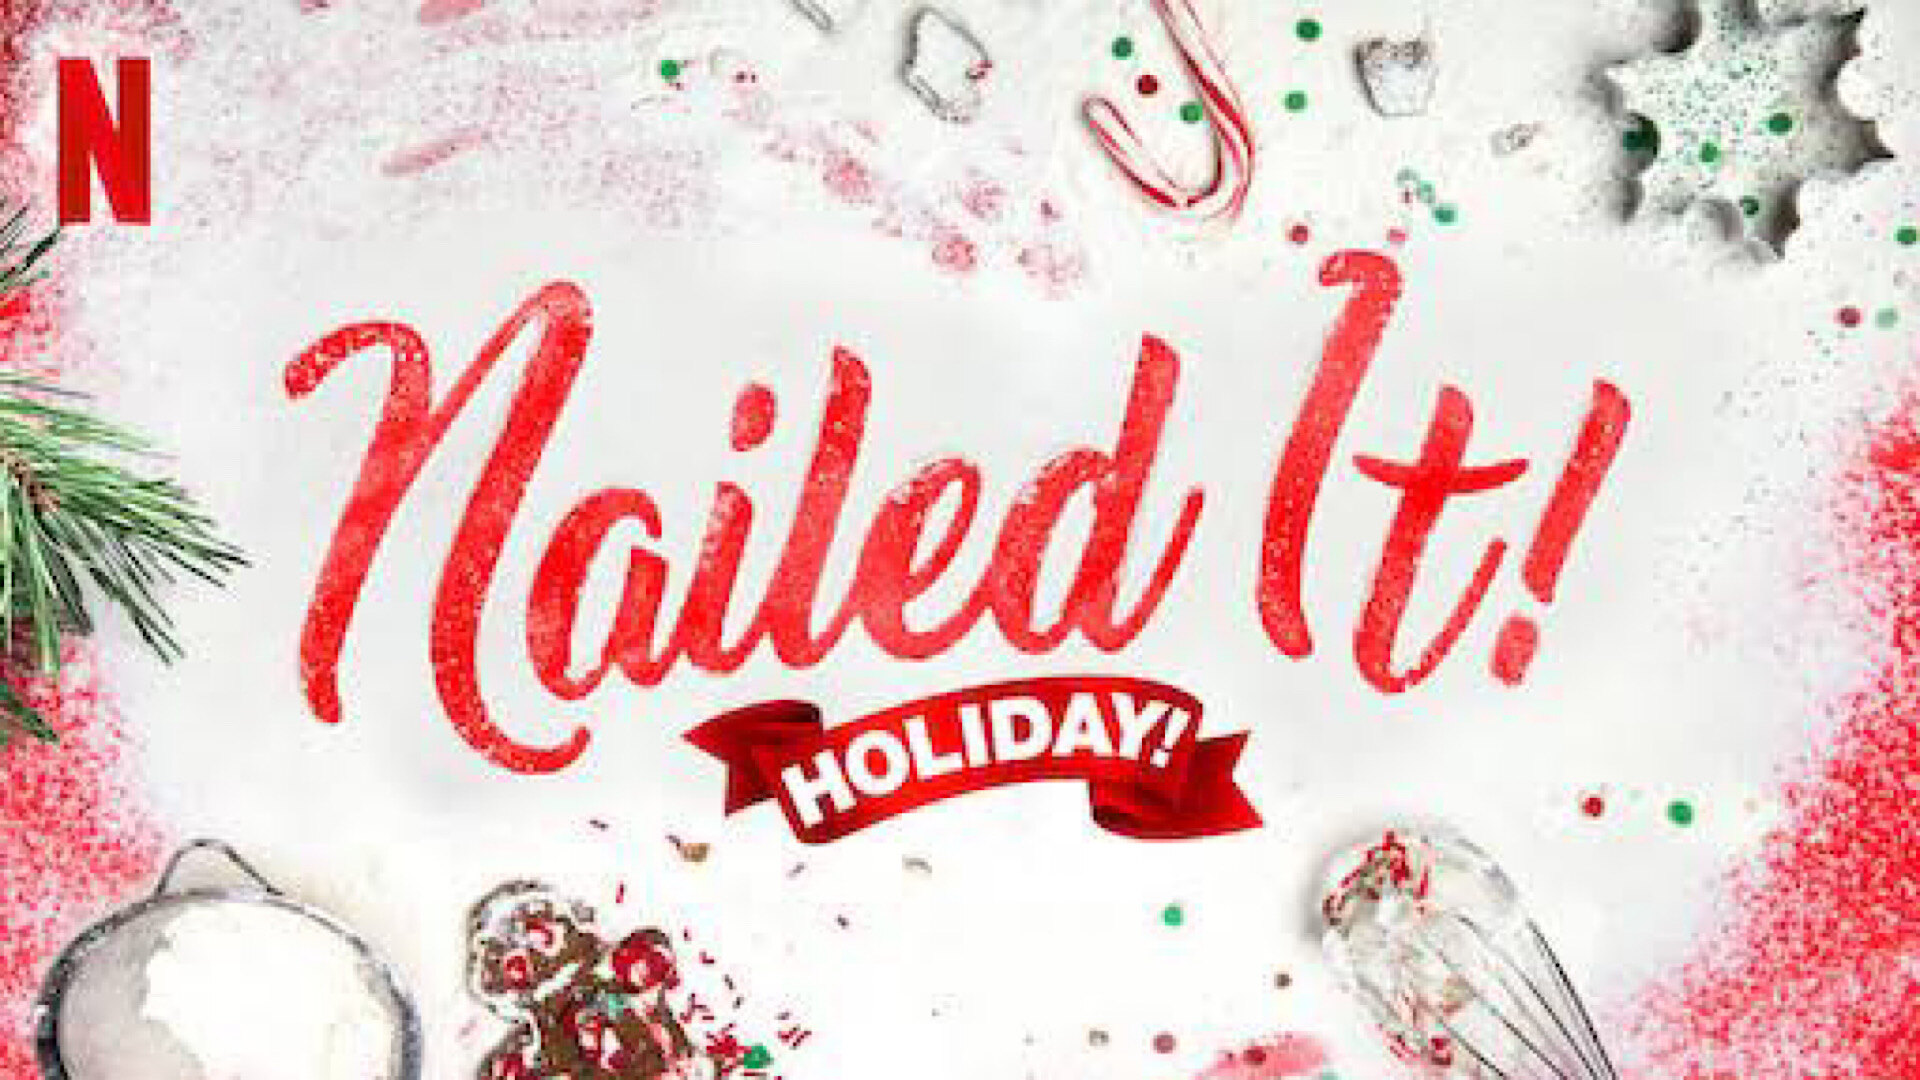 "Nailed It! Holiday!" - wide 5